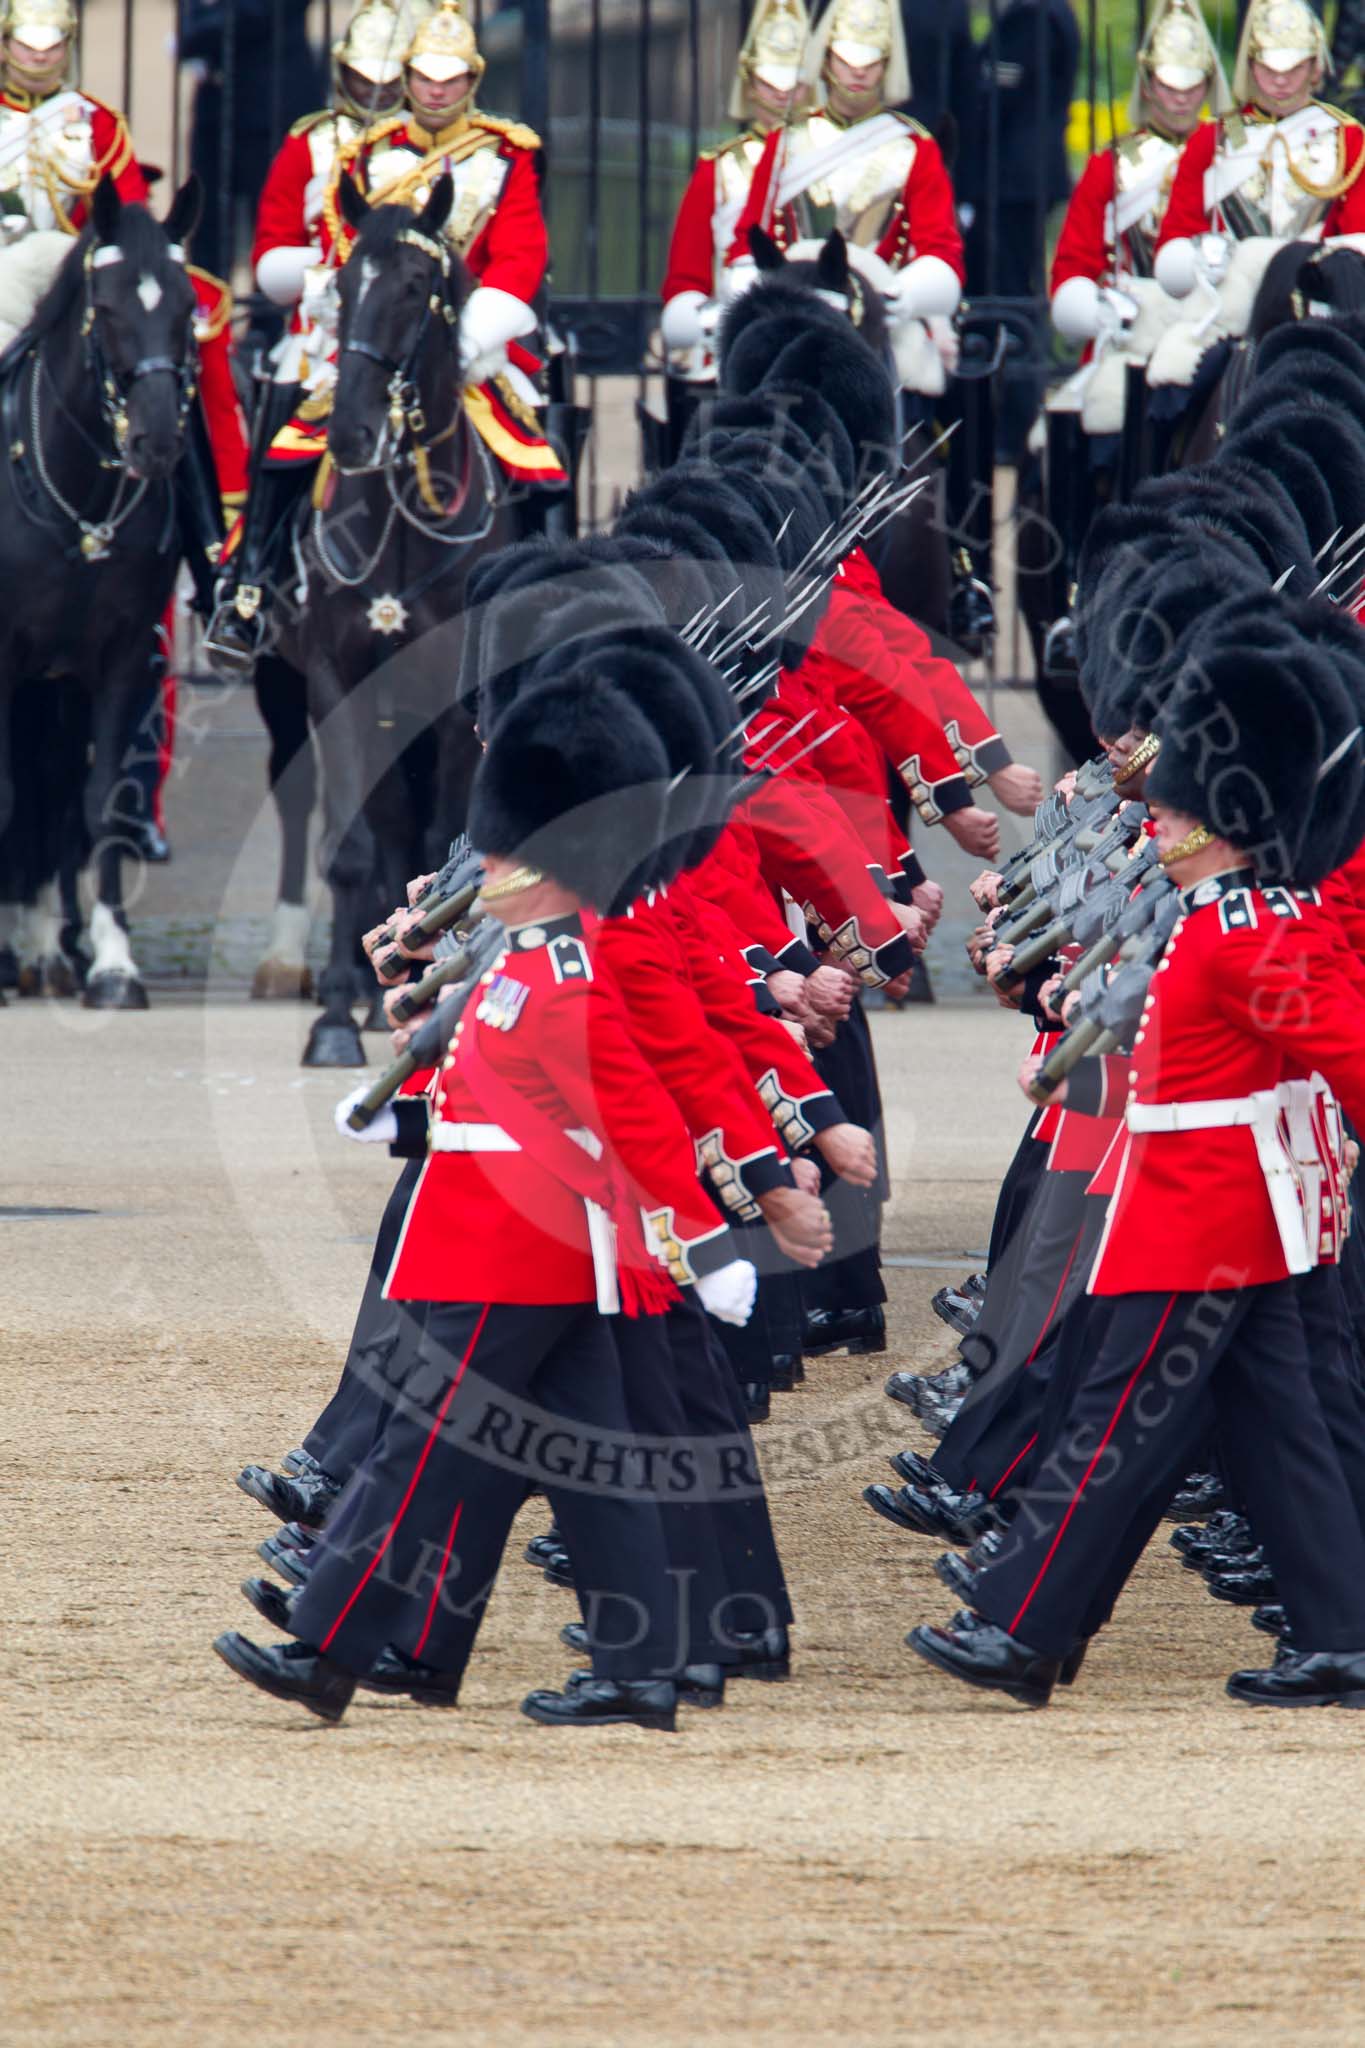 Trooping the Colour 2011: No. 3 Guard, F Company Scots Guards, during the March Past. In the background, The Life Guards from the Household Cavalry..
Horse Guards Parade, Westminster,
London SW1,
Greater London,
United Kingdom,
on 11 June 2011 at 11:43, image #274